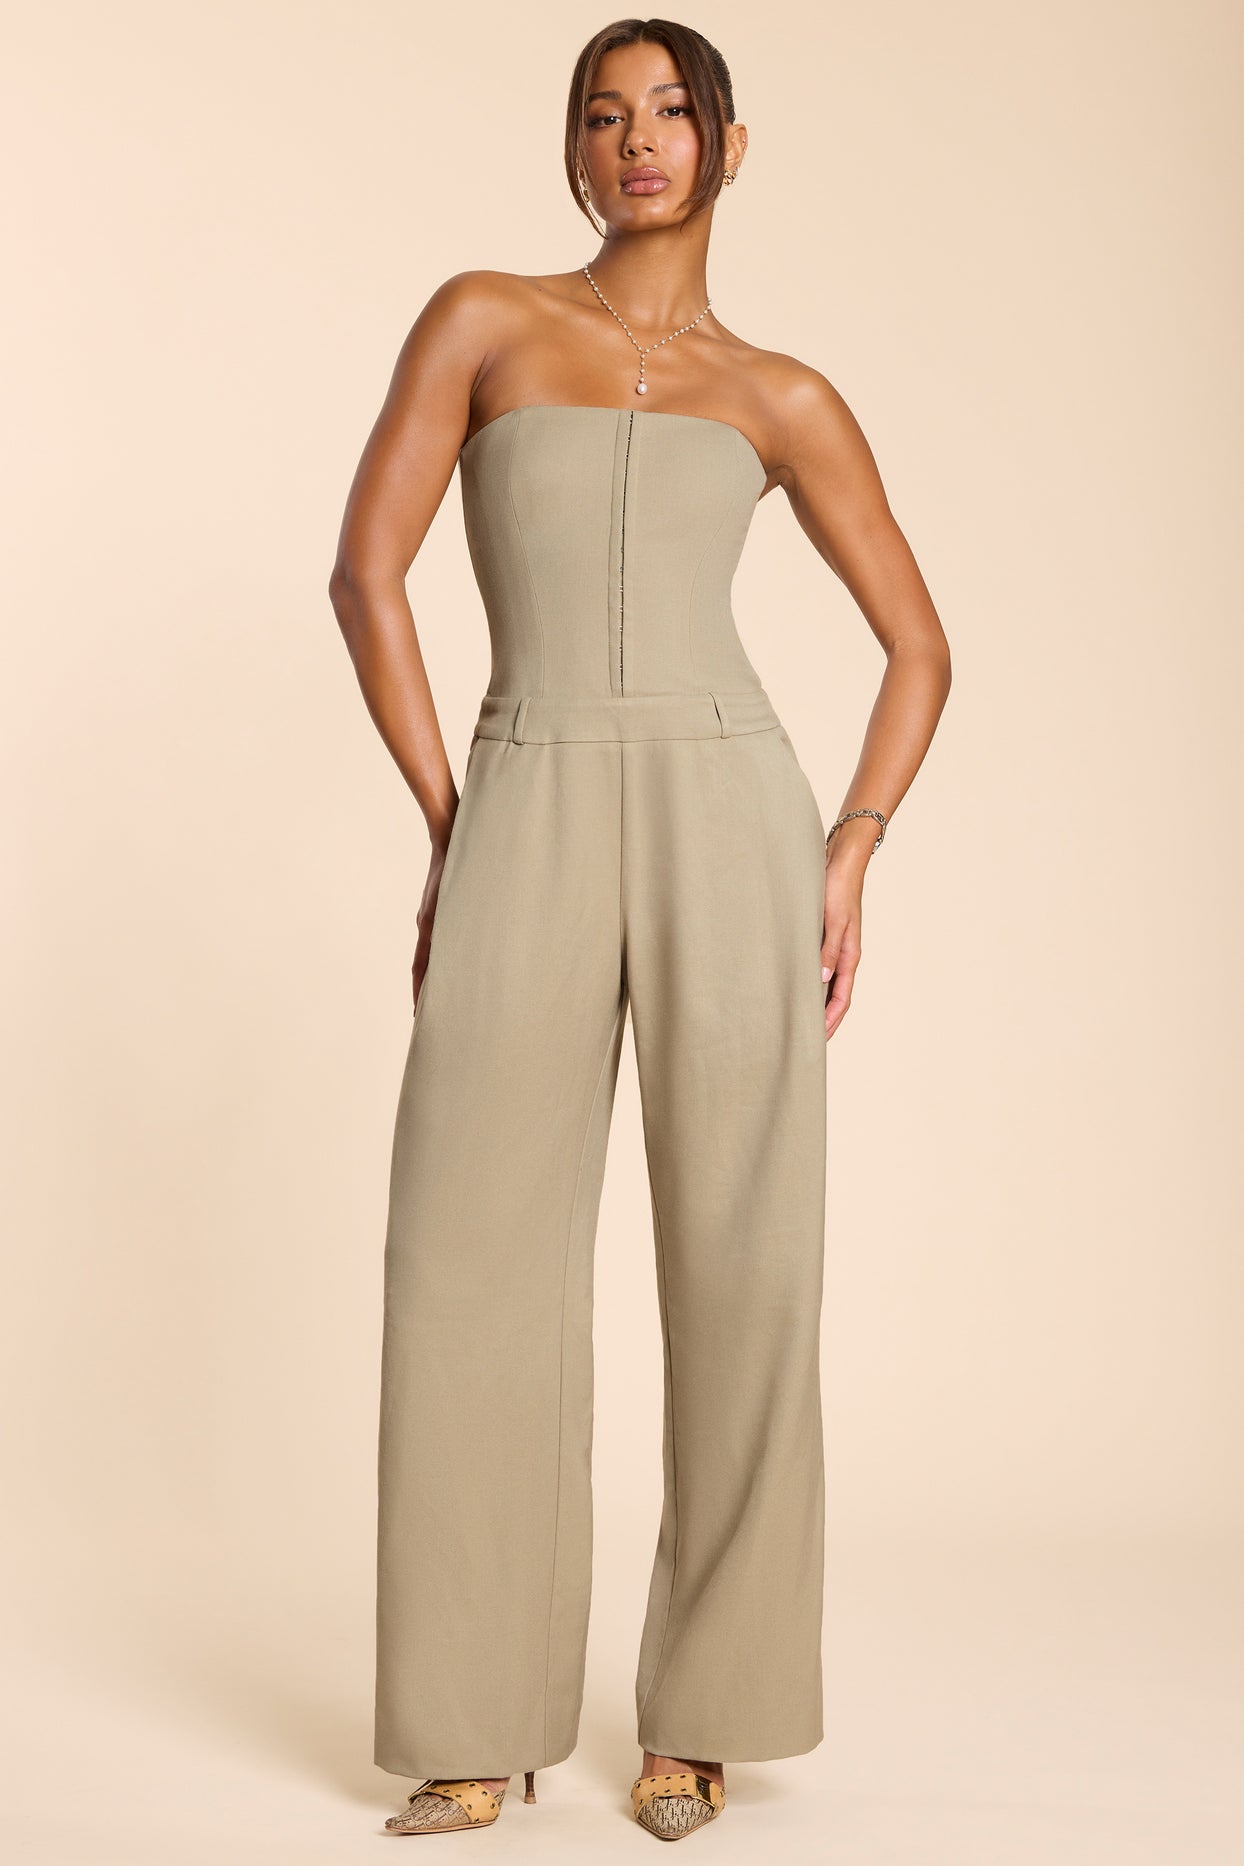 Petite Brushed Twill Bandeau Corset Jumpsuit in Taupe